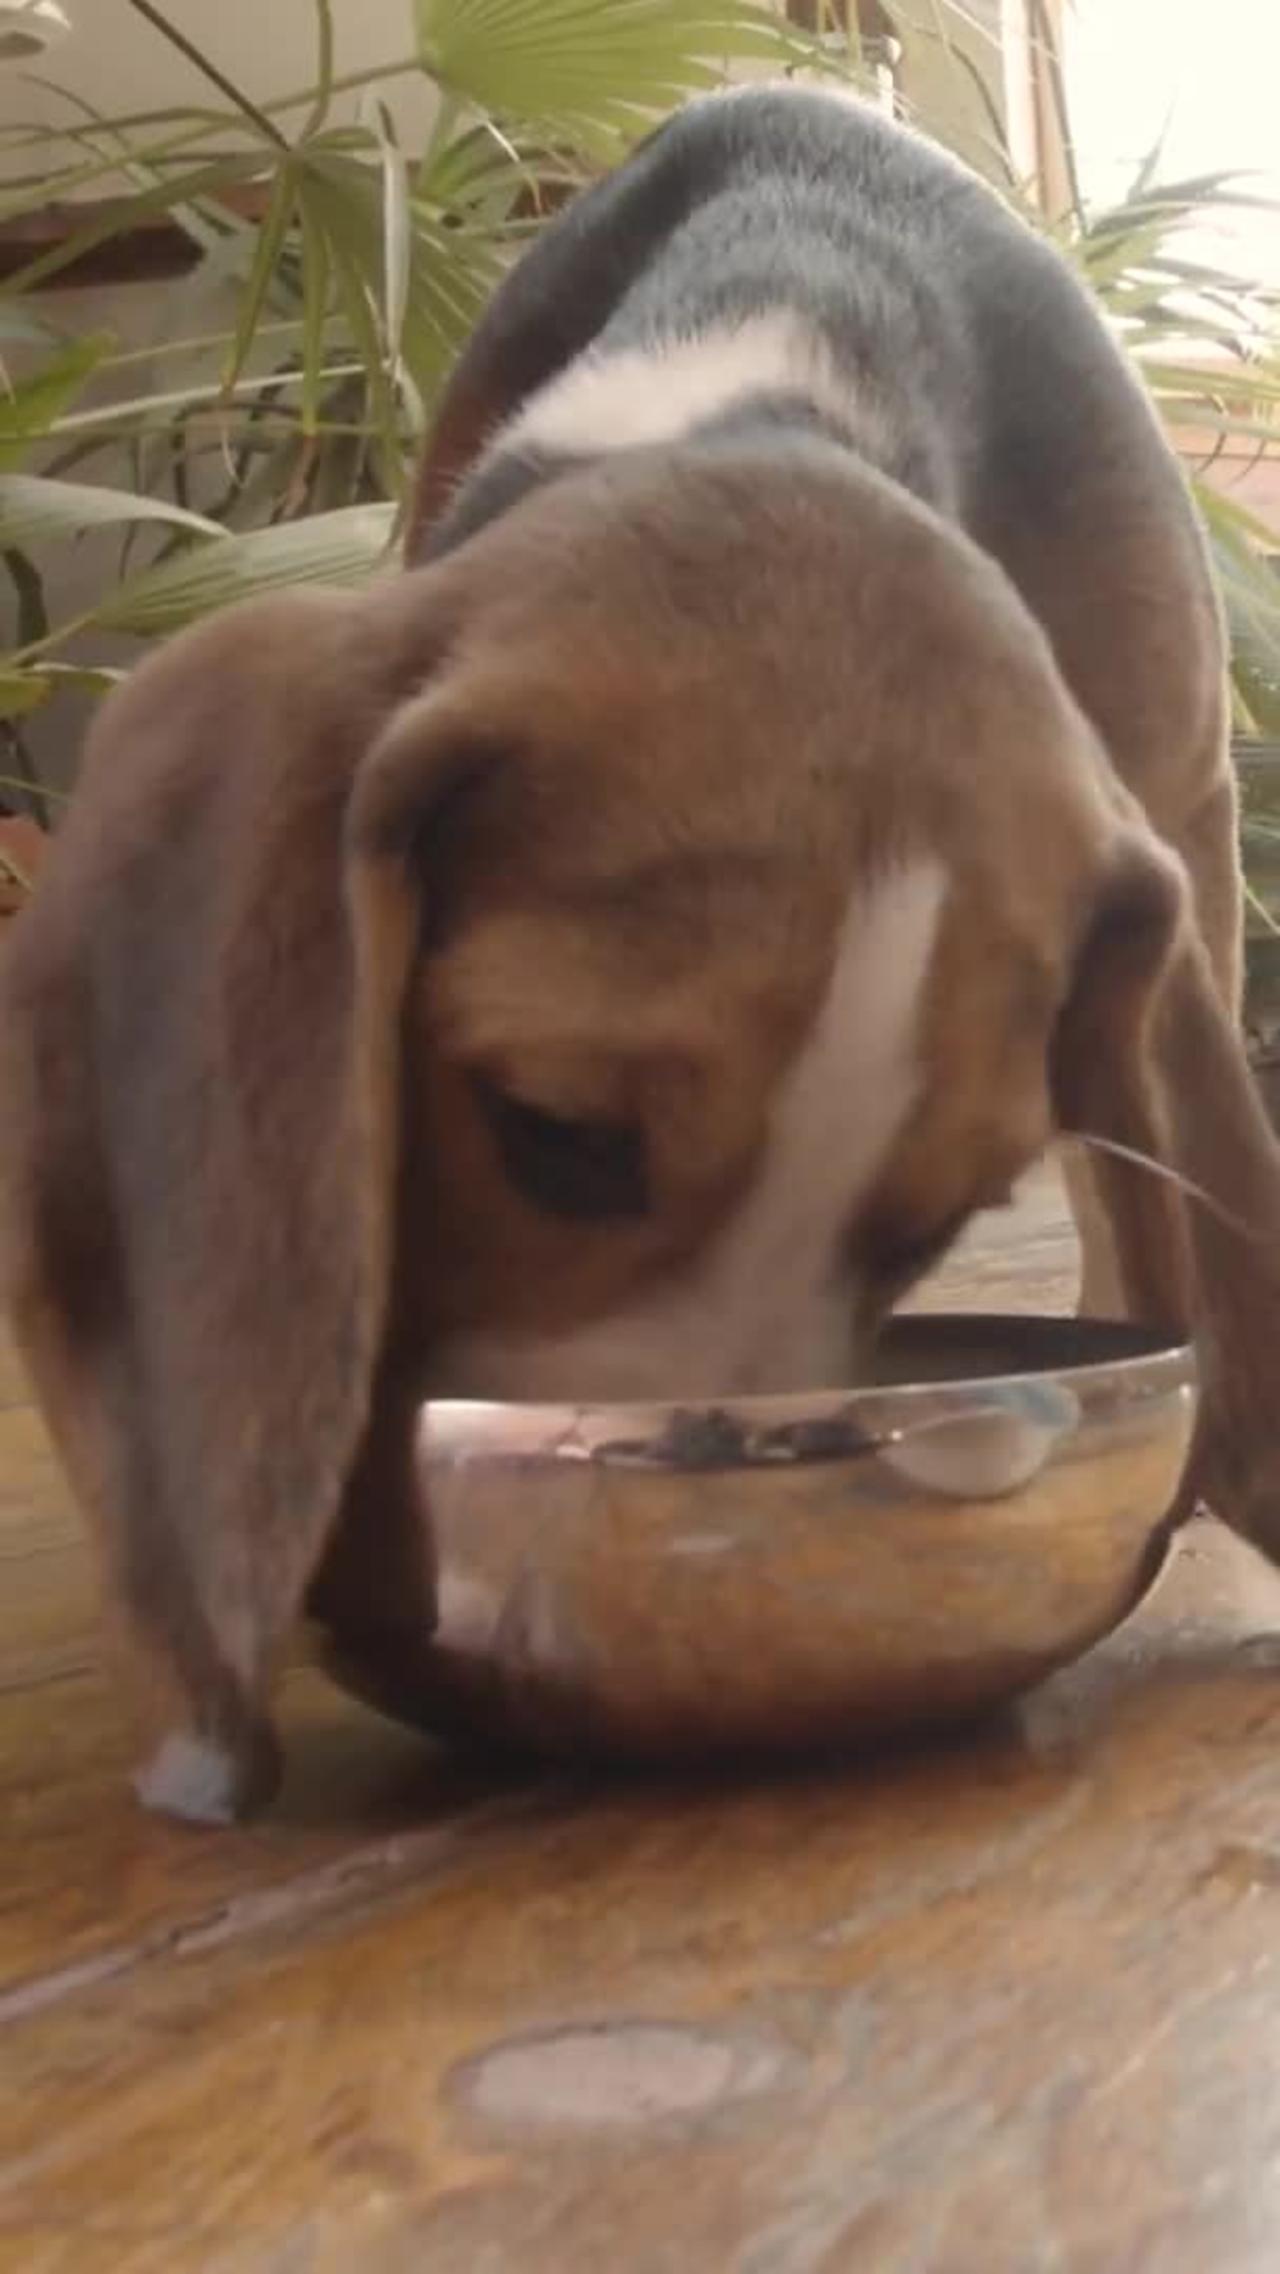 Dog eating food tranding One News Page VIDEO